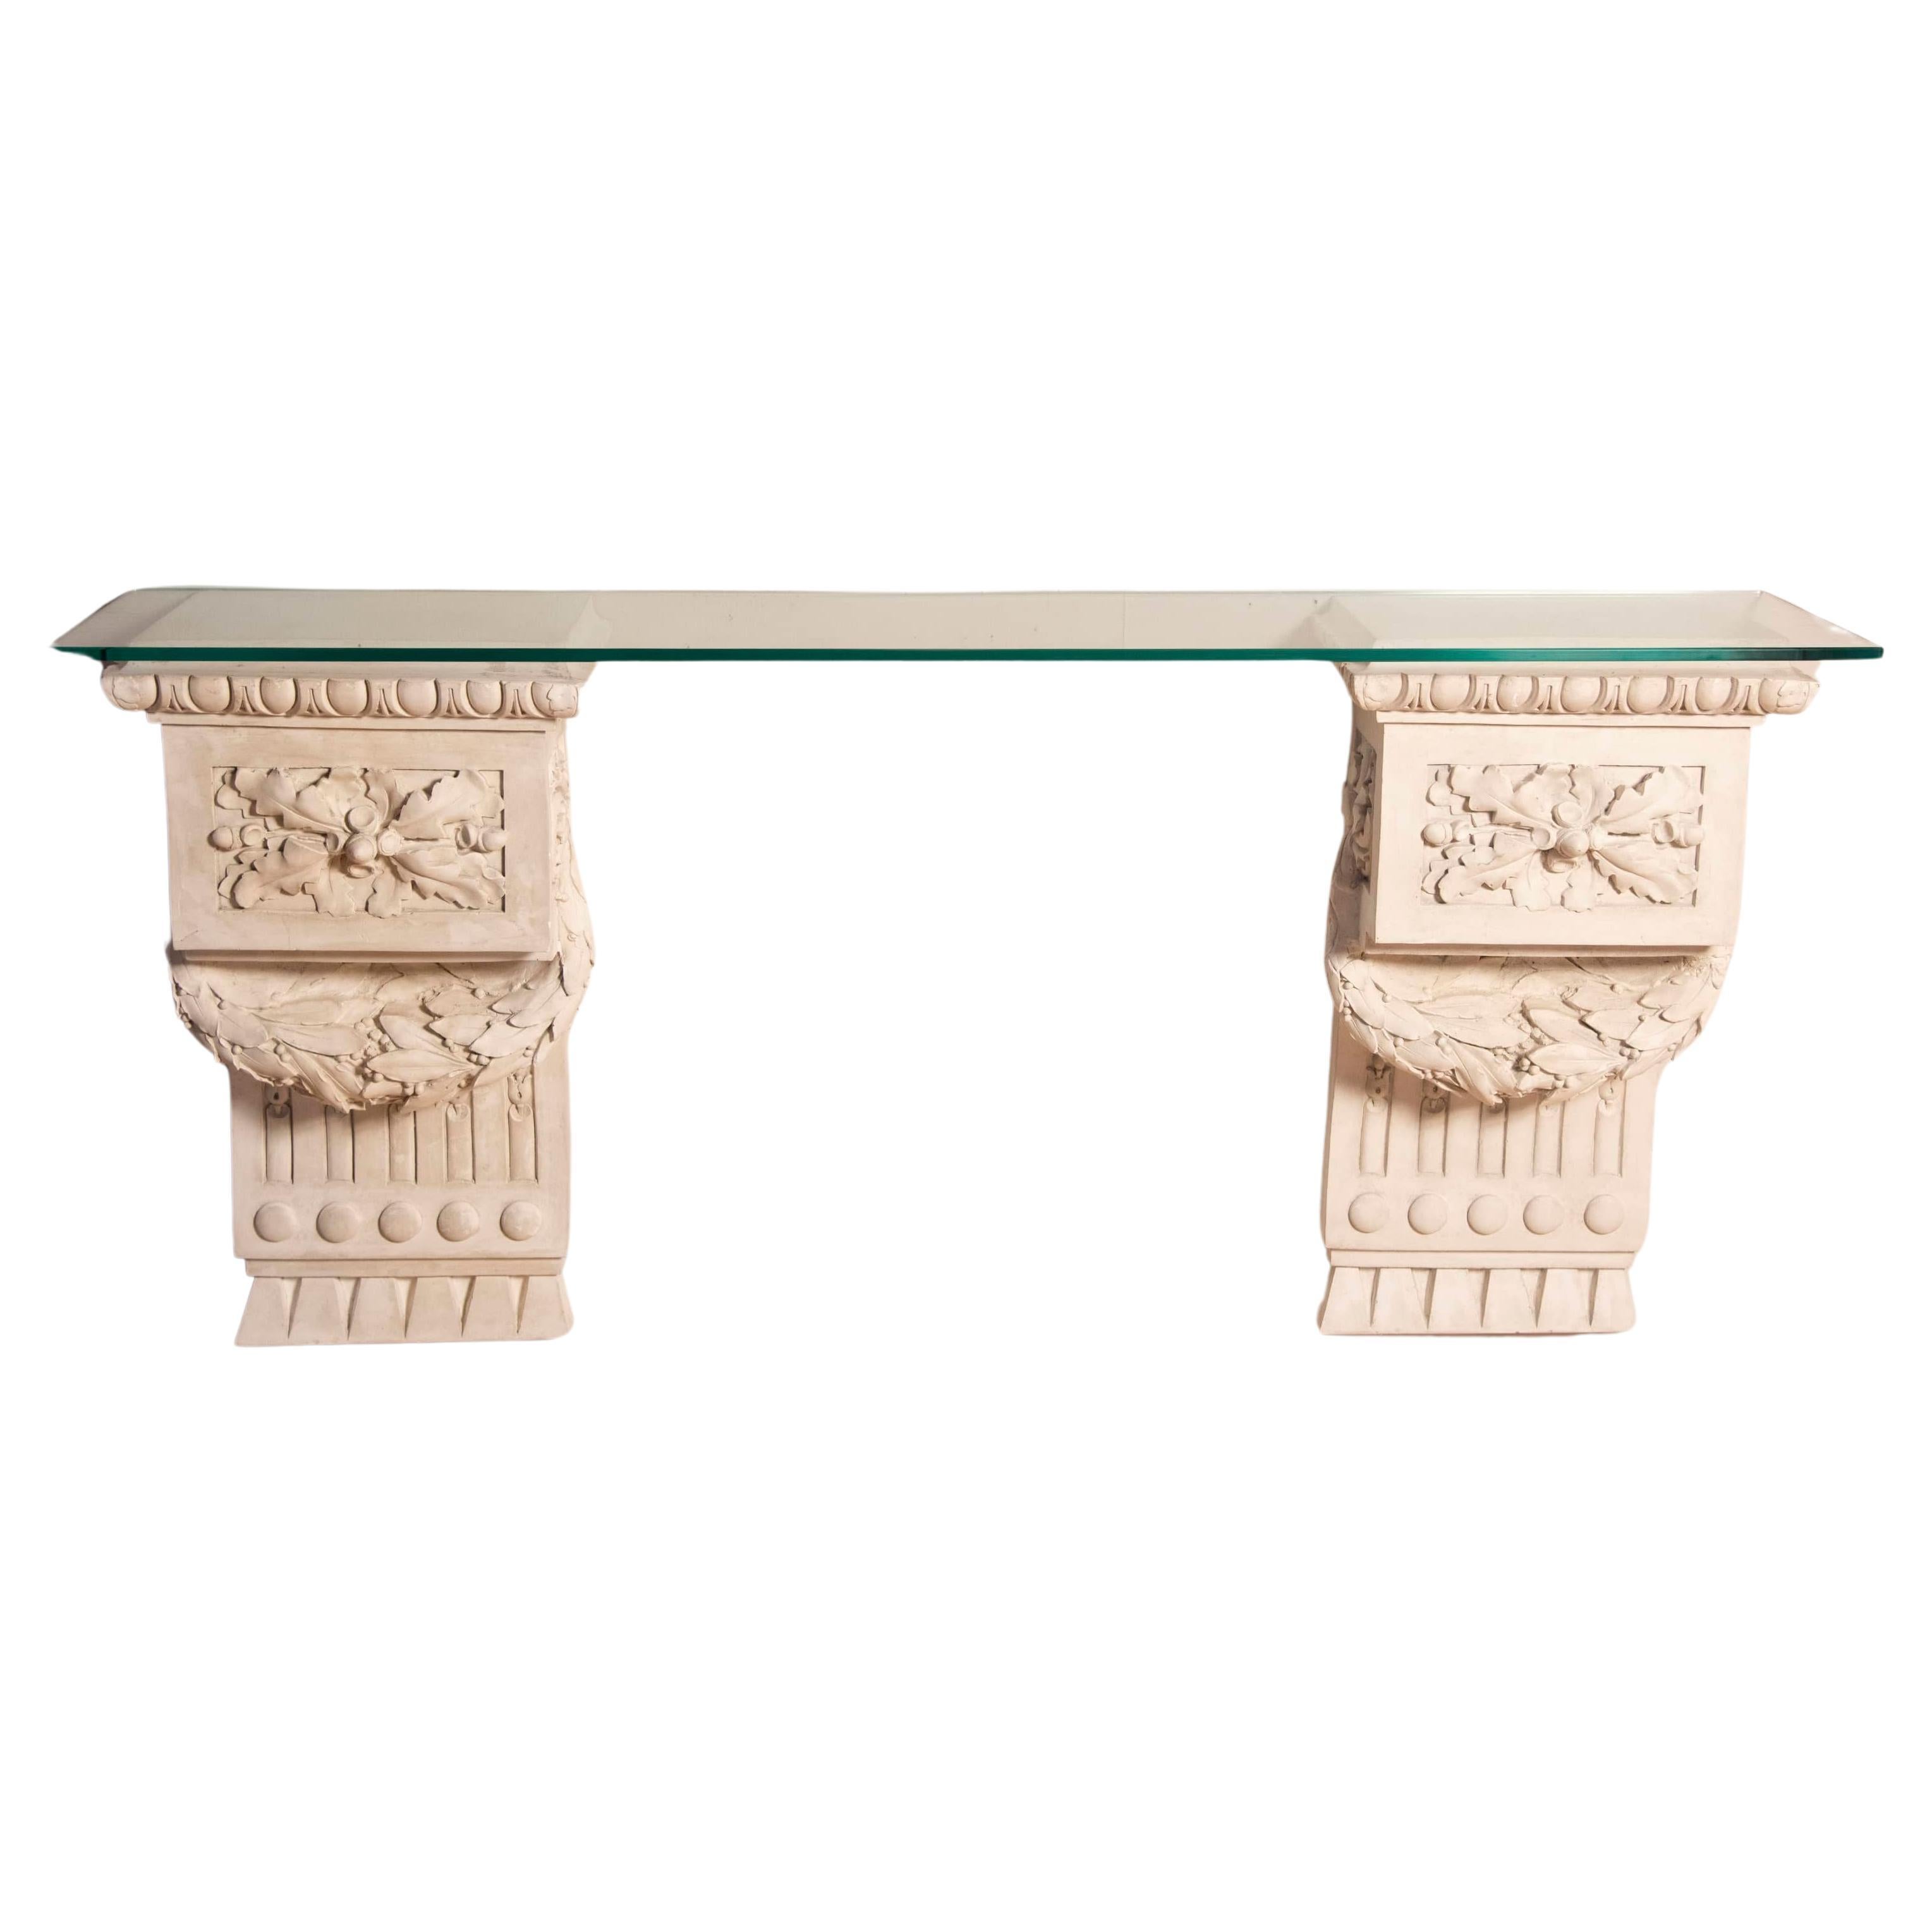 1930s Louis XVI style White Plaster Friezes Console Table Top Glass